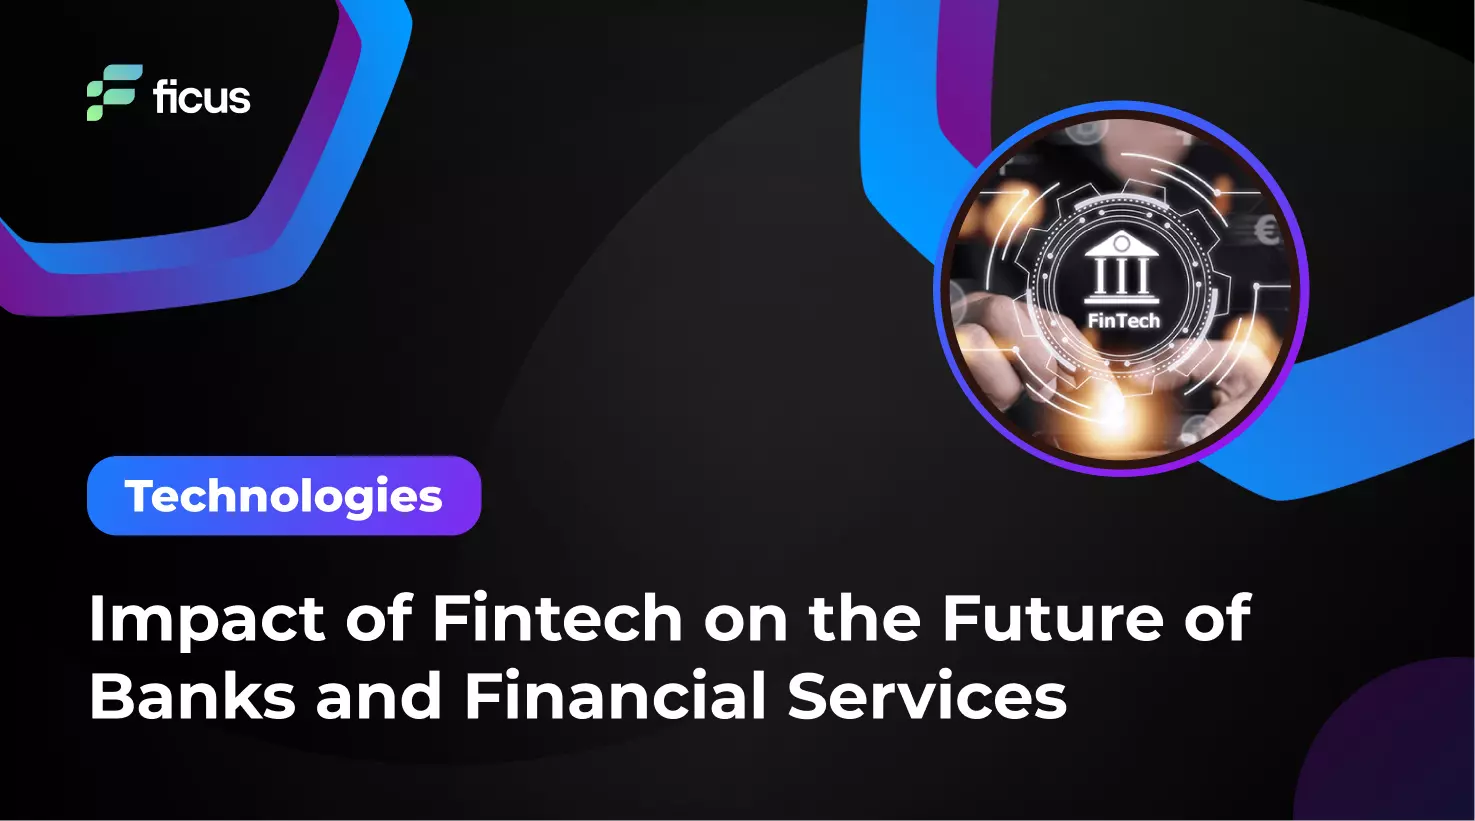 Impact of Fintech on the Future of Banks and Financial Services